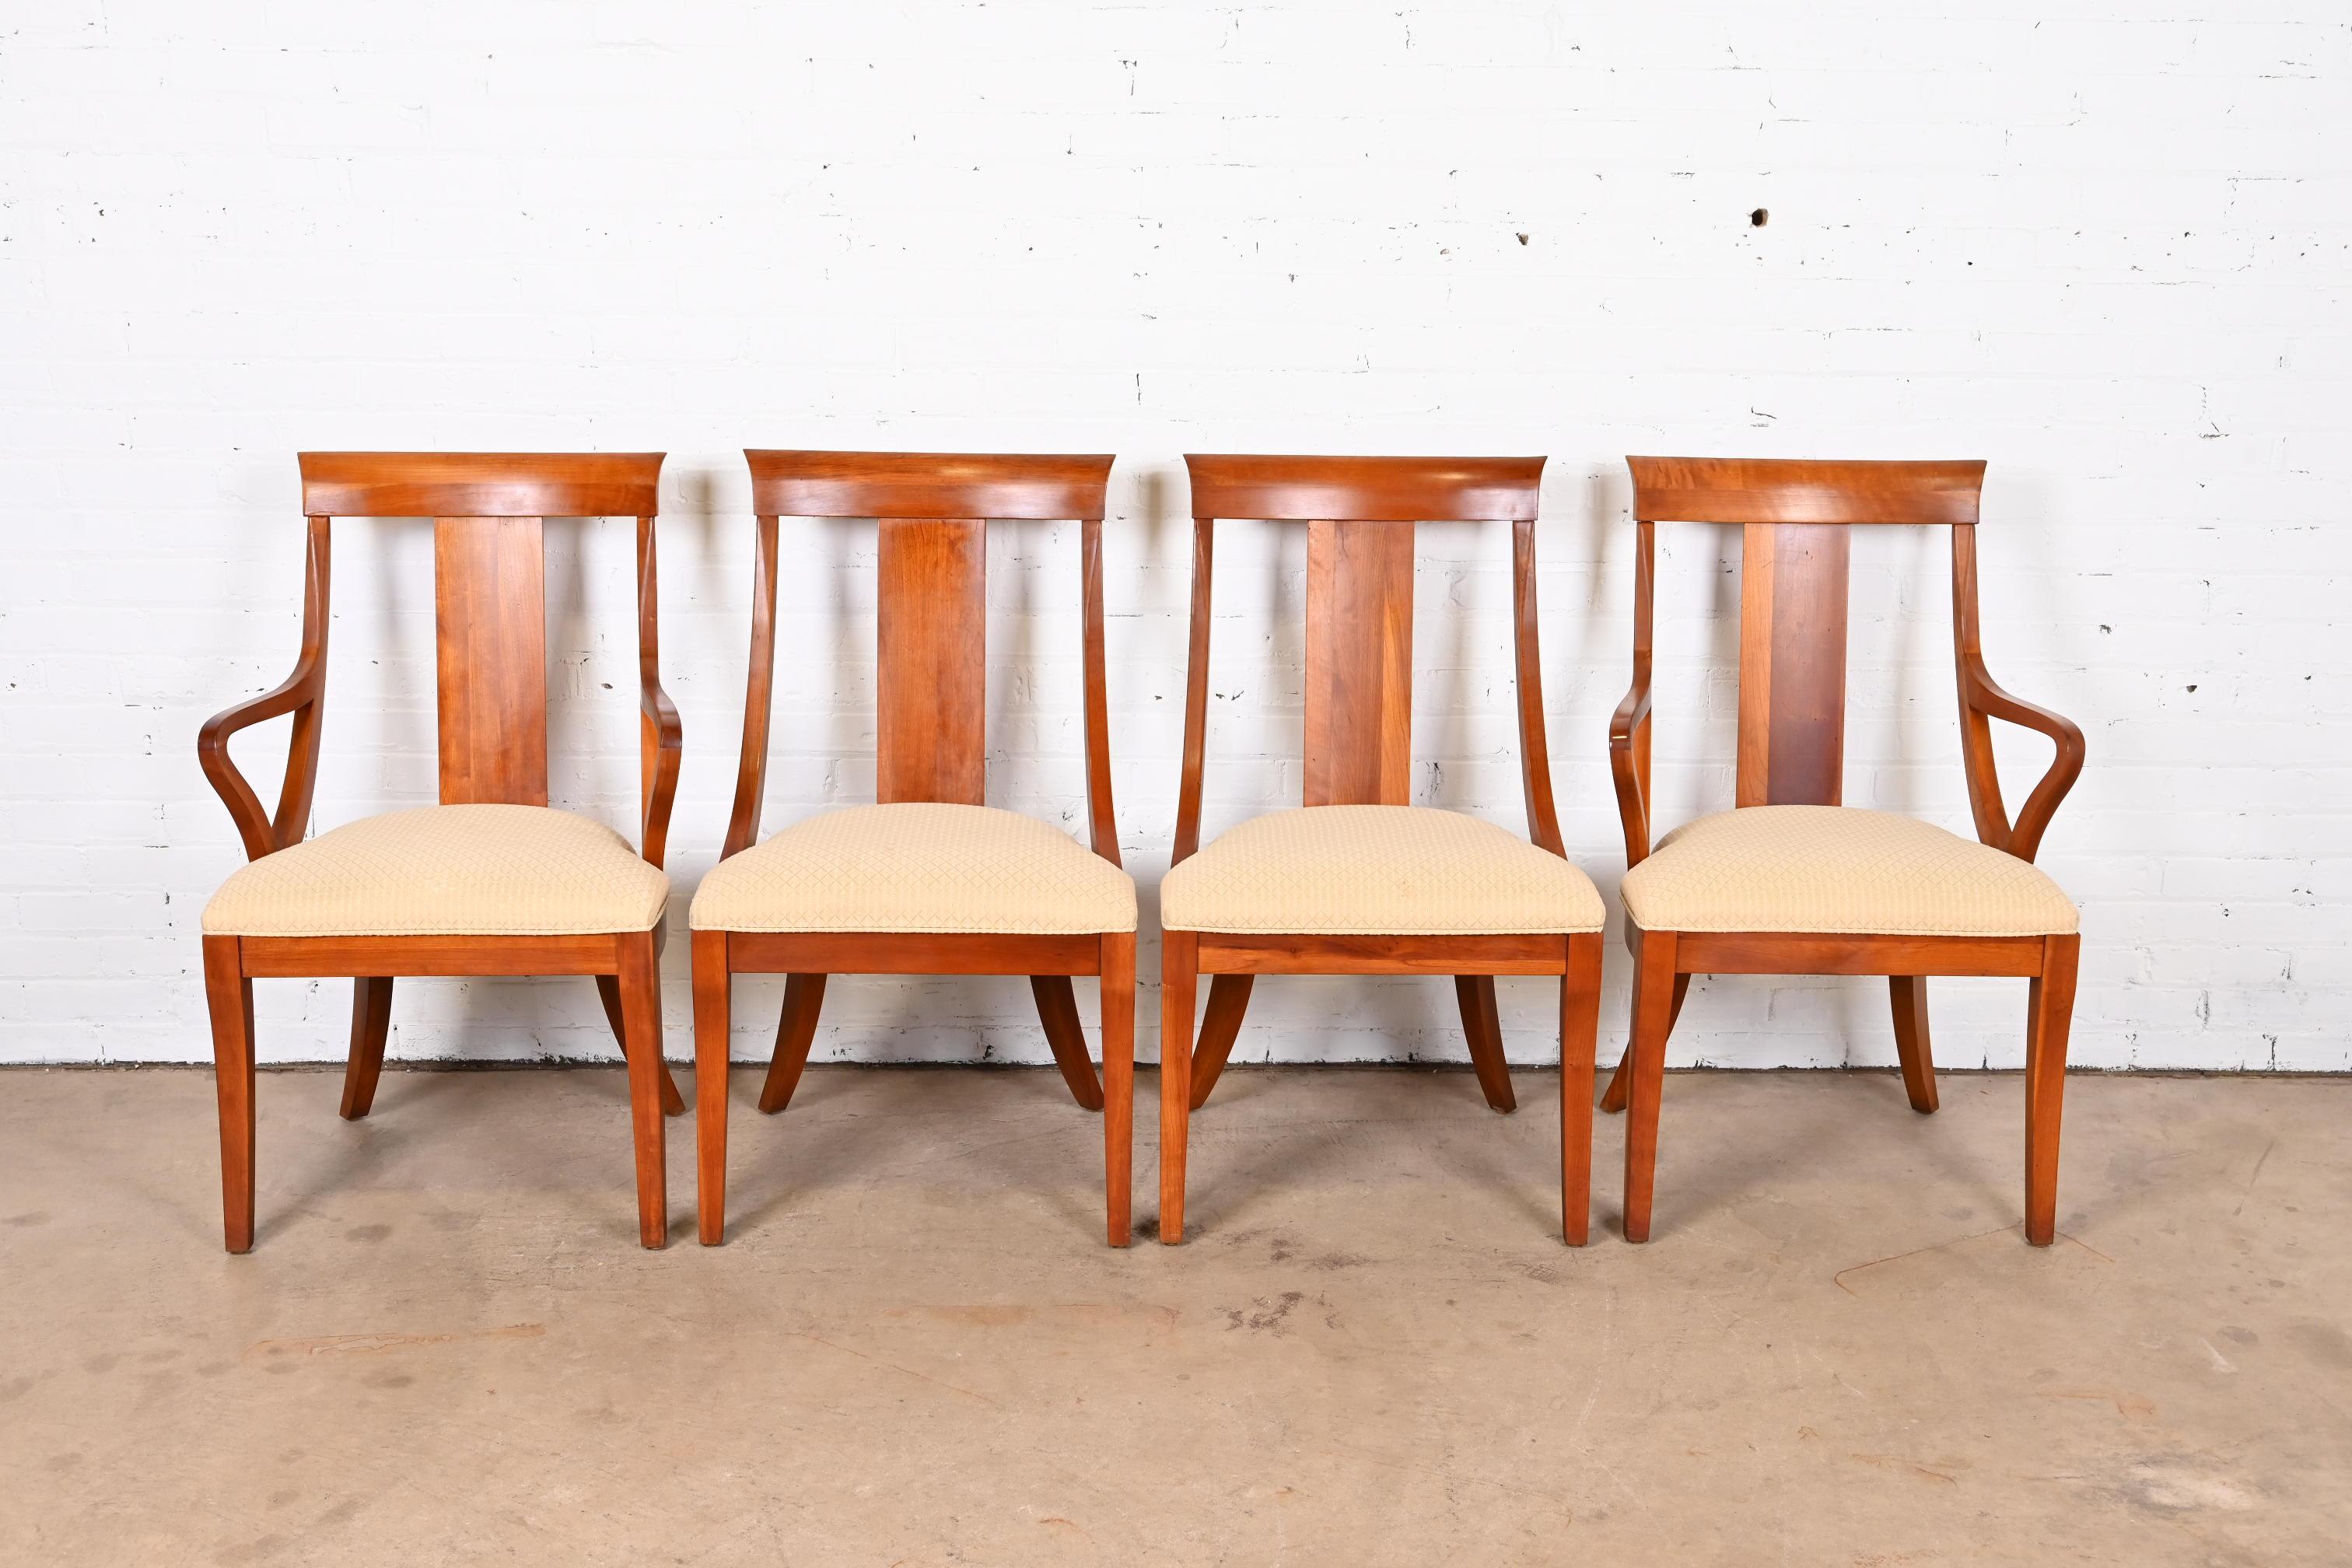 A gorgeous set of four Regency Klismos style dining chairs

By Ethan Allen

USA, late 20th century

Carved cherry wood frames, with upholstered seats.

Measures:
Side chairs: 21.63